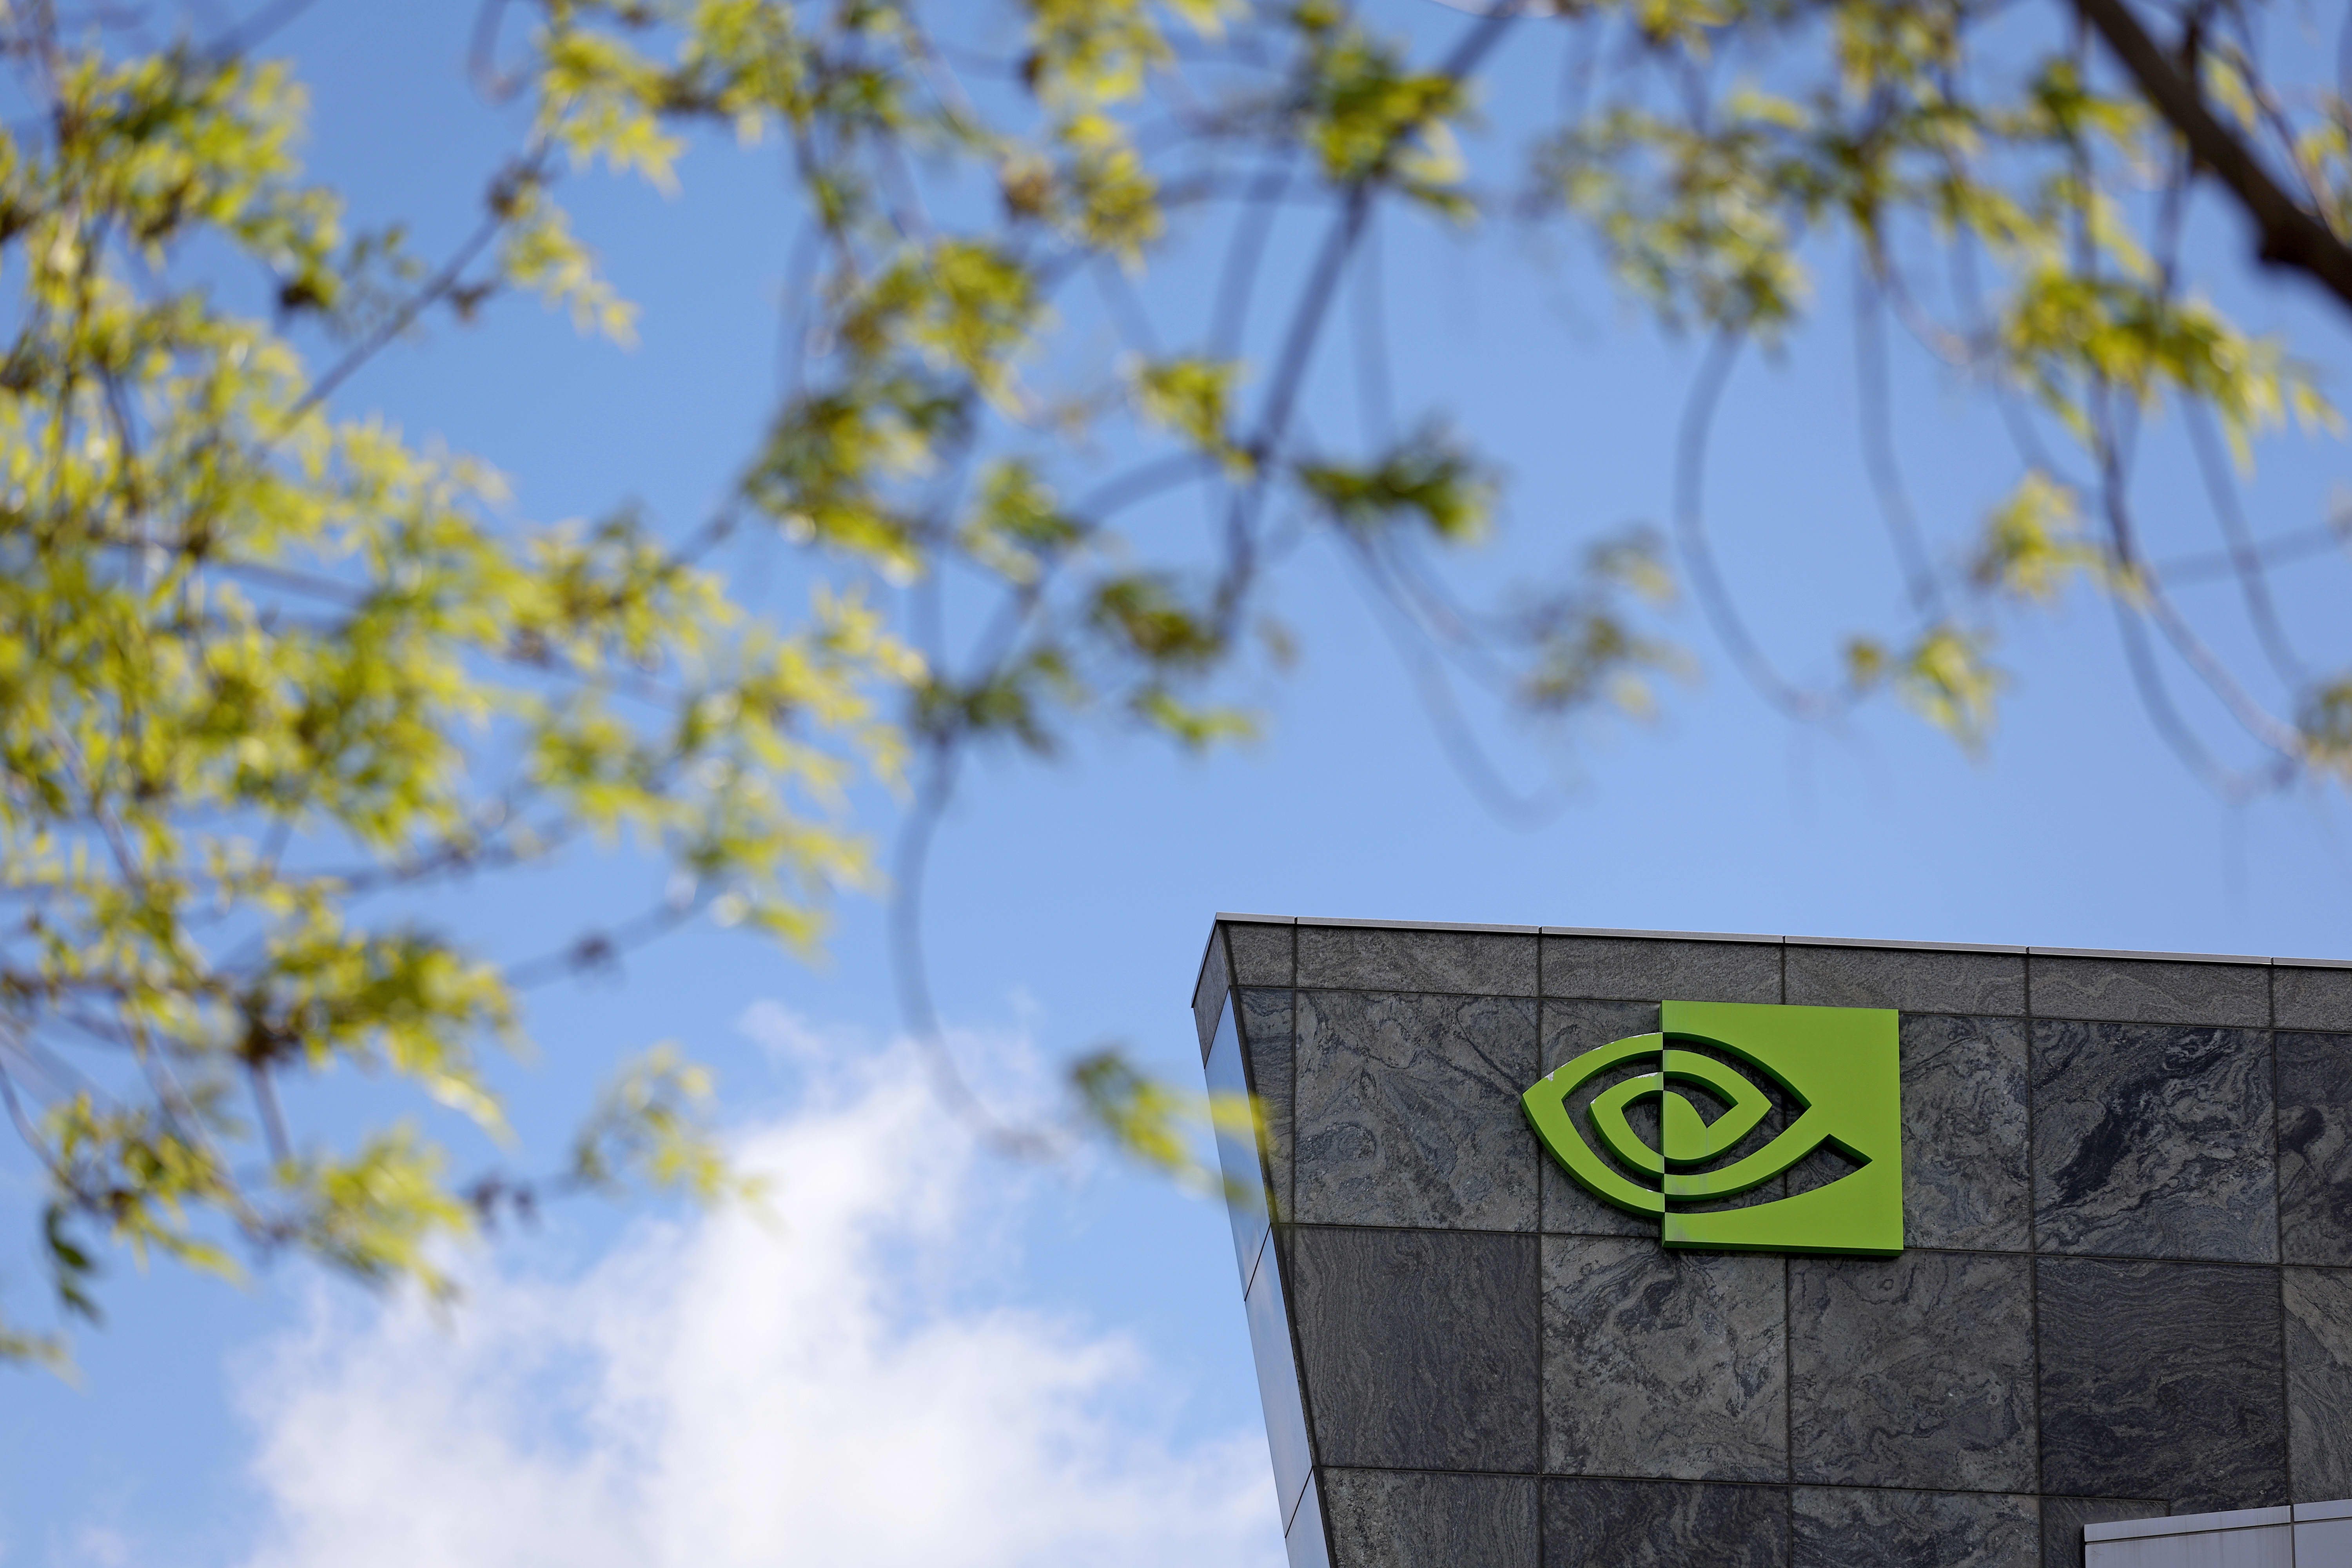 According to KeyBanc, Nvidia is poised to set itself apart from its peers ahead of this week's semiconductor gains